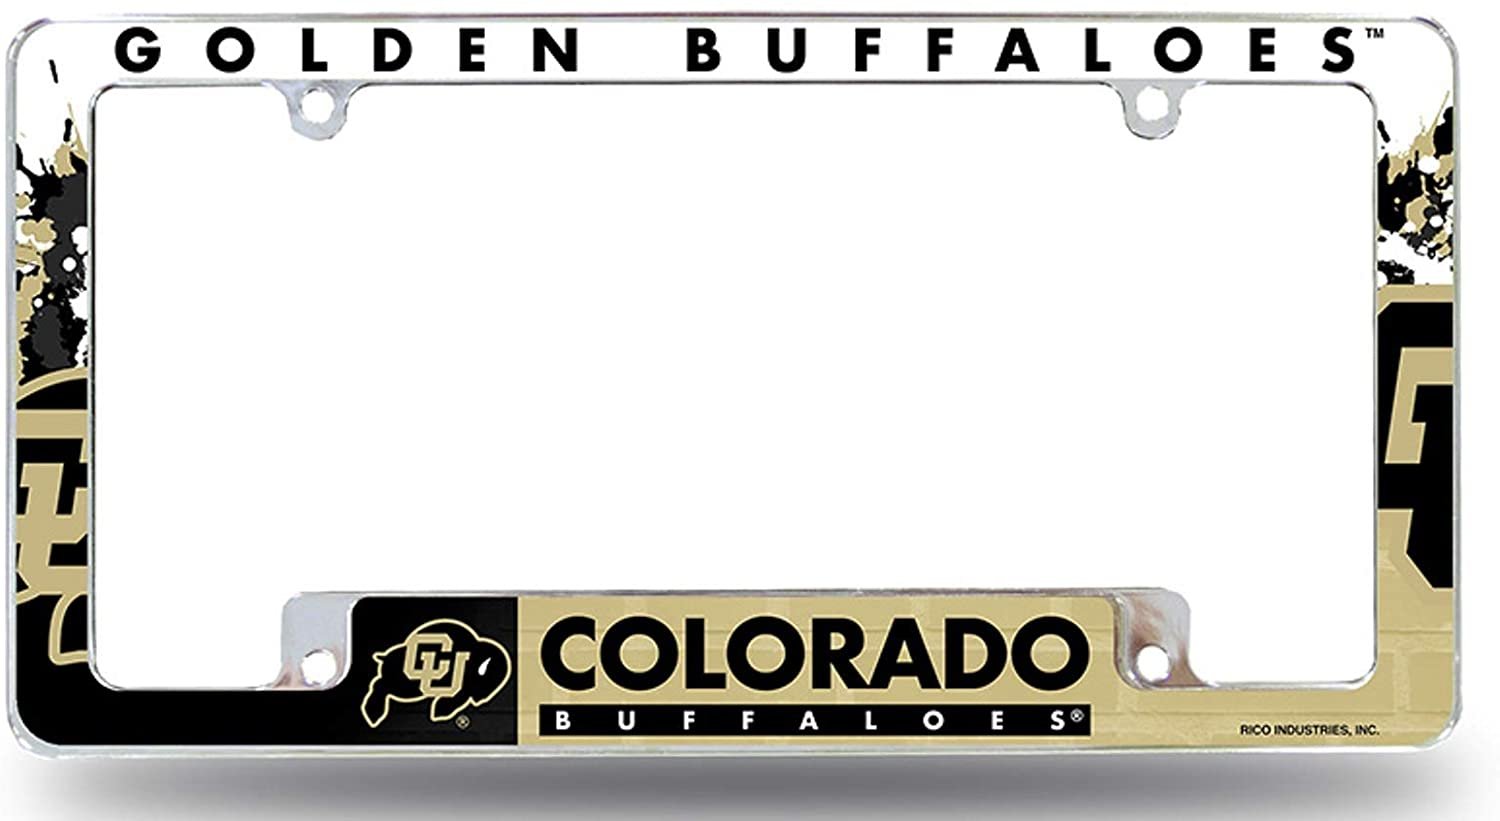 University of Colorado Buffaloes Metal License Plate Frame Metal Tag Cover EZ View All Over Design Heavy Gauge